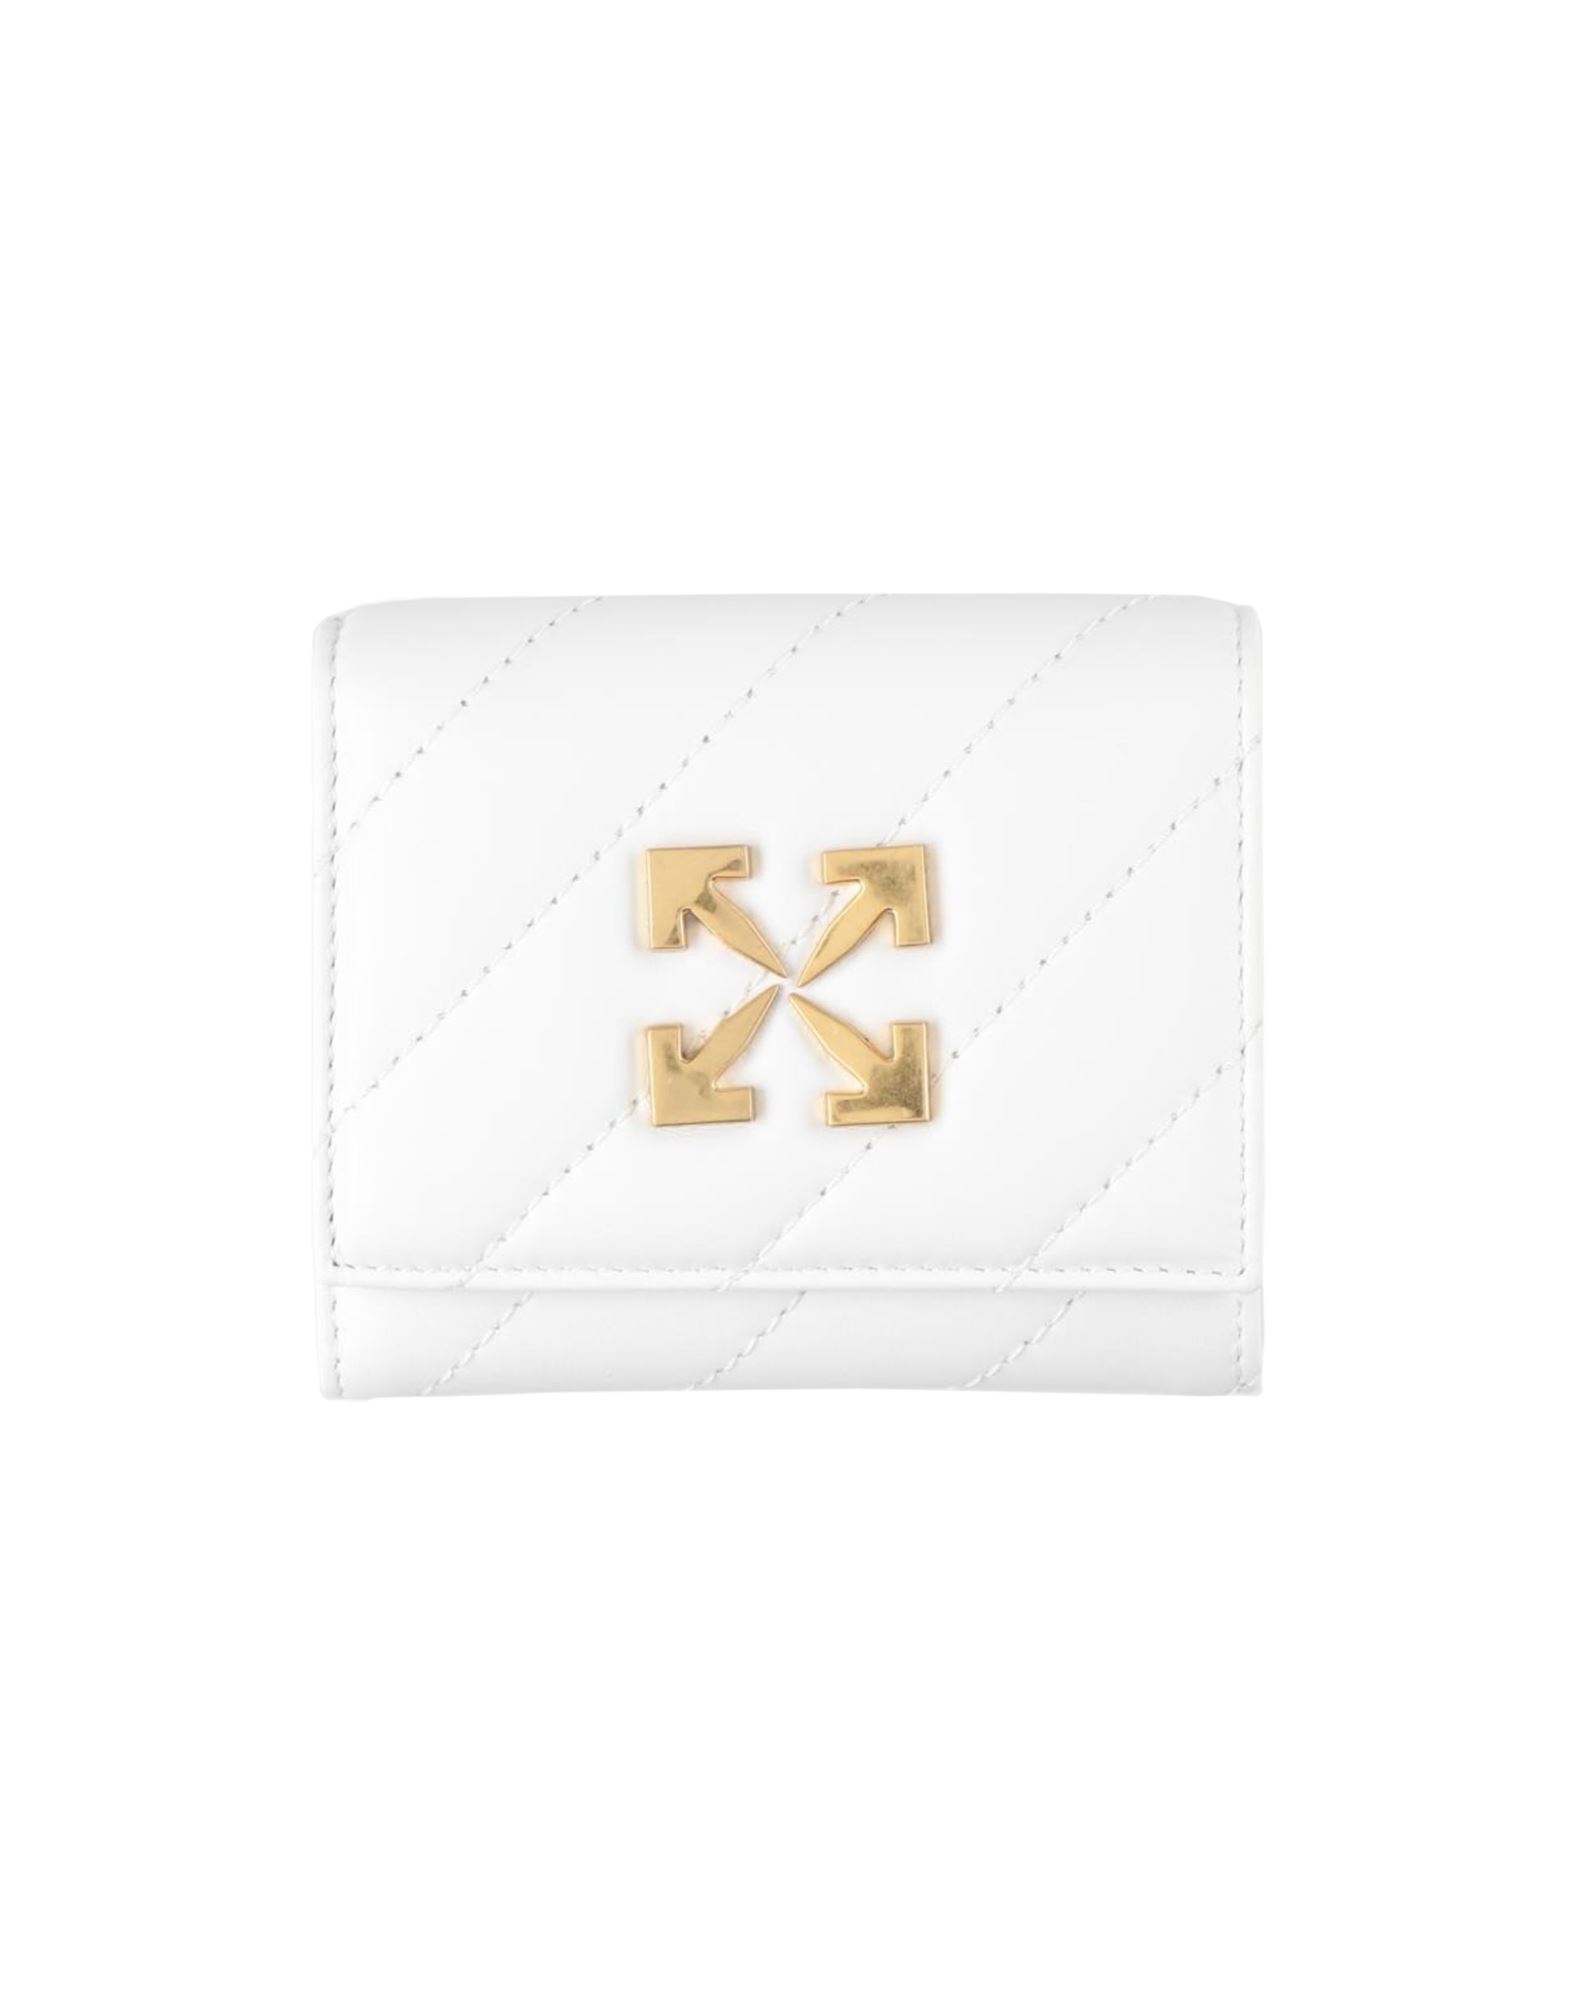 OFF-WHITE OFF-WHITE WOMAN WALLET WHITE SIZE - SOFT LEATHER